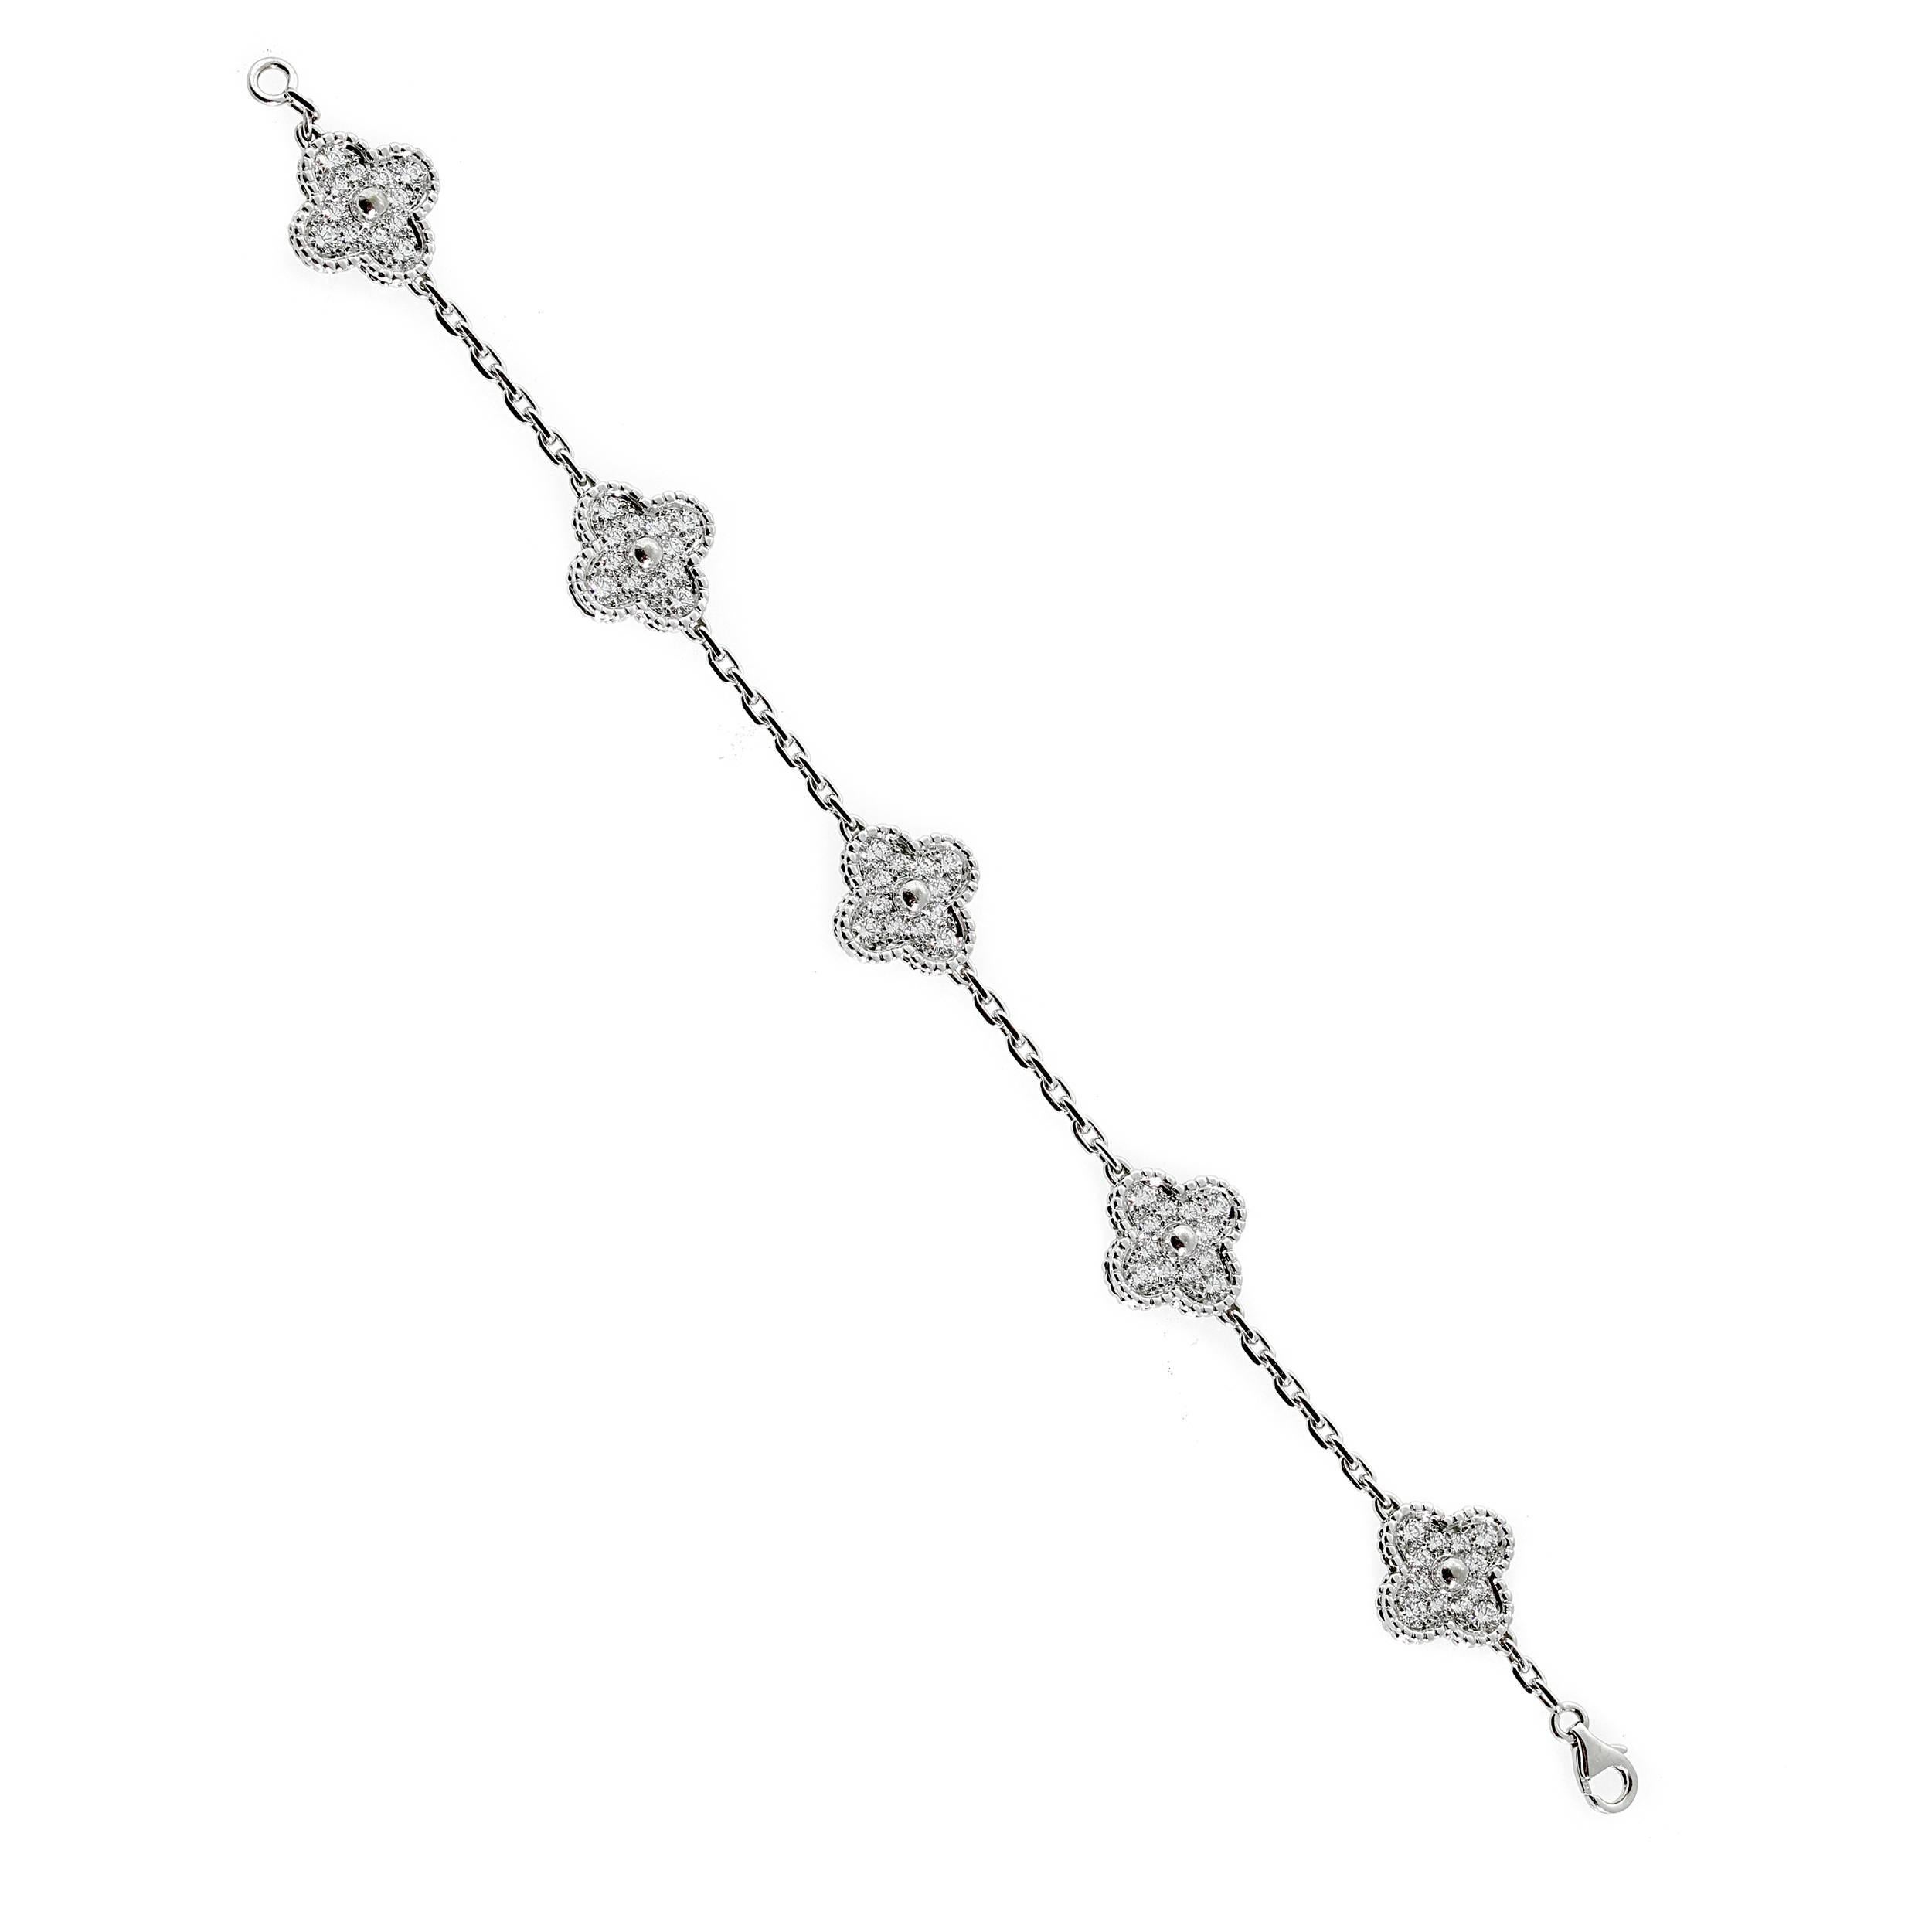 A classic Van Cleef & Arpels Vintage Alhambra bracelet featuring 5 iconic stations adorned with the finest Van Cleef & Arpels round brilliant cut diamonds in 18k white gold.

Retail: 25,800+ Tax

Inventory ID: 0000542